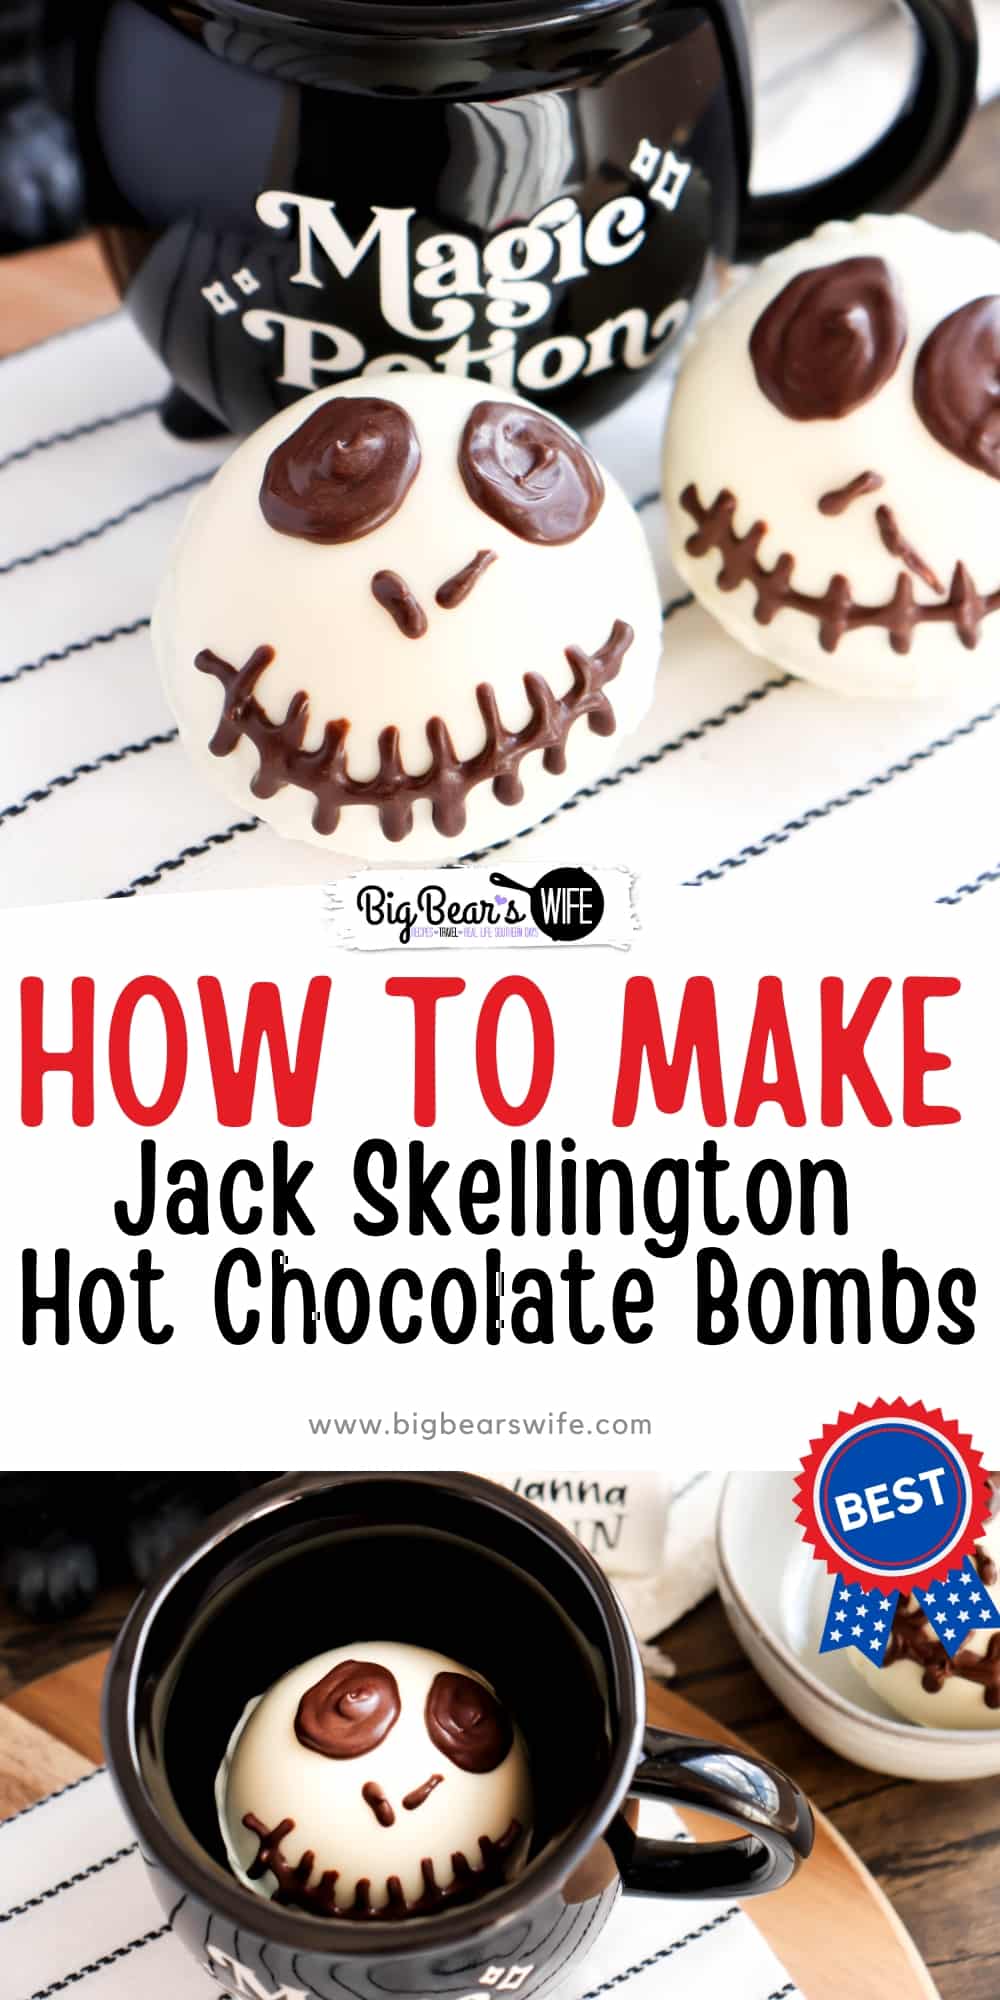 A Nightmare Before Hot Chocolate: Jack Skellington Hot Chocolate Bombs are Here! Step into a whimsical nightmare with Jack Skellington hot chocolate bombs that will send shivers down your spine and warm your soul.  via @bigbearswife